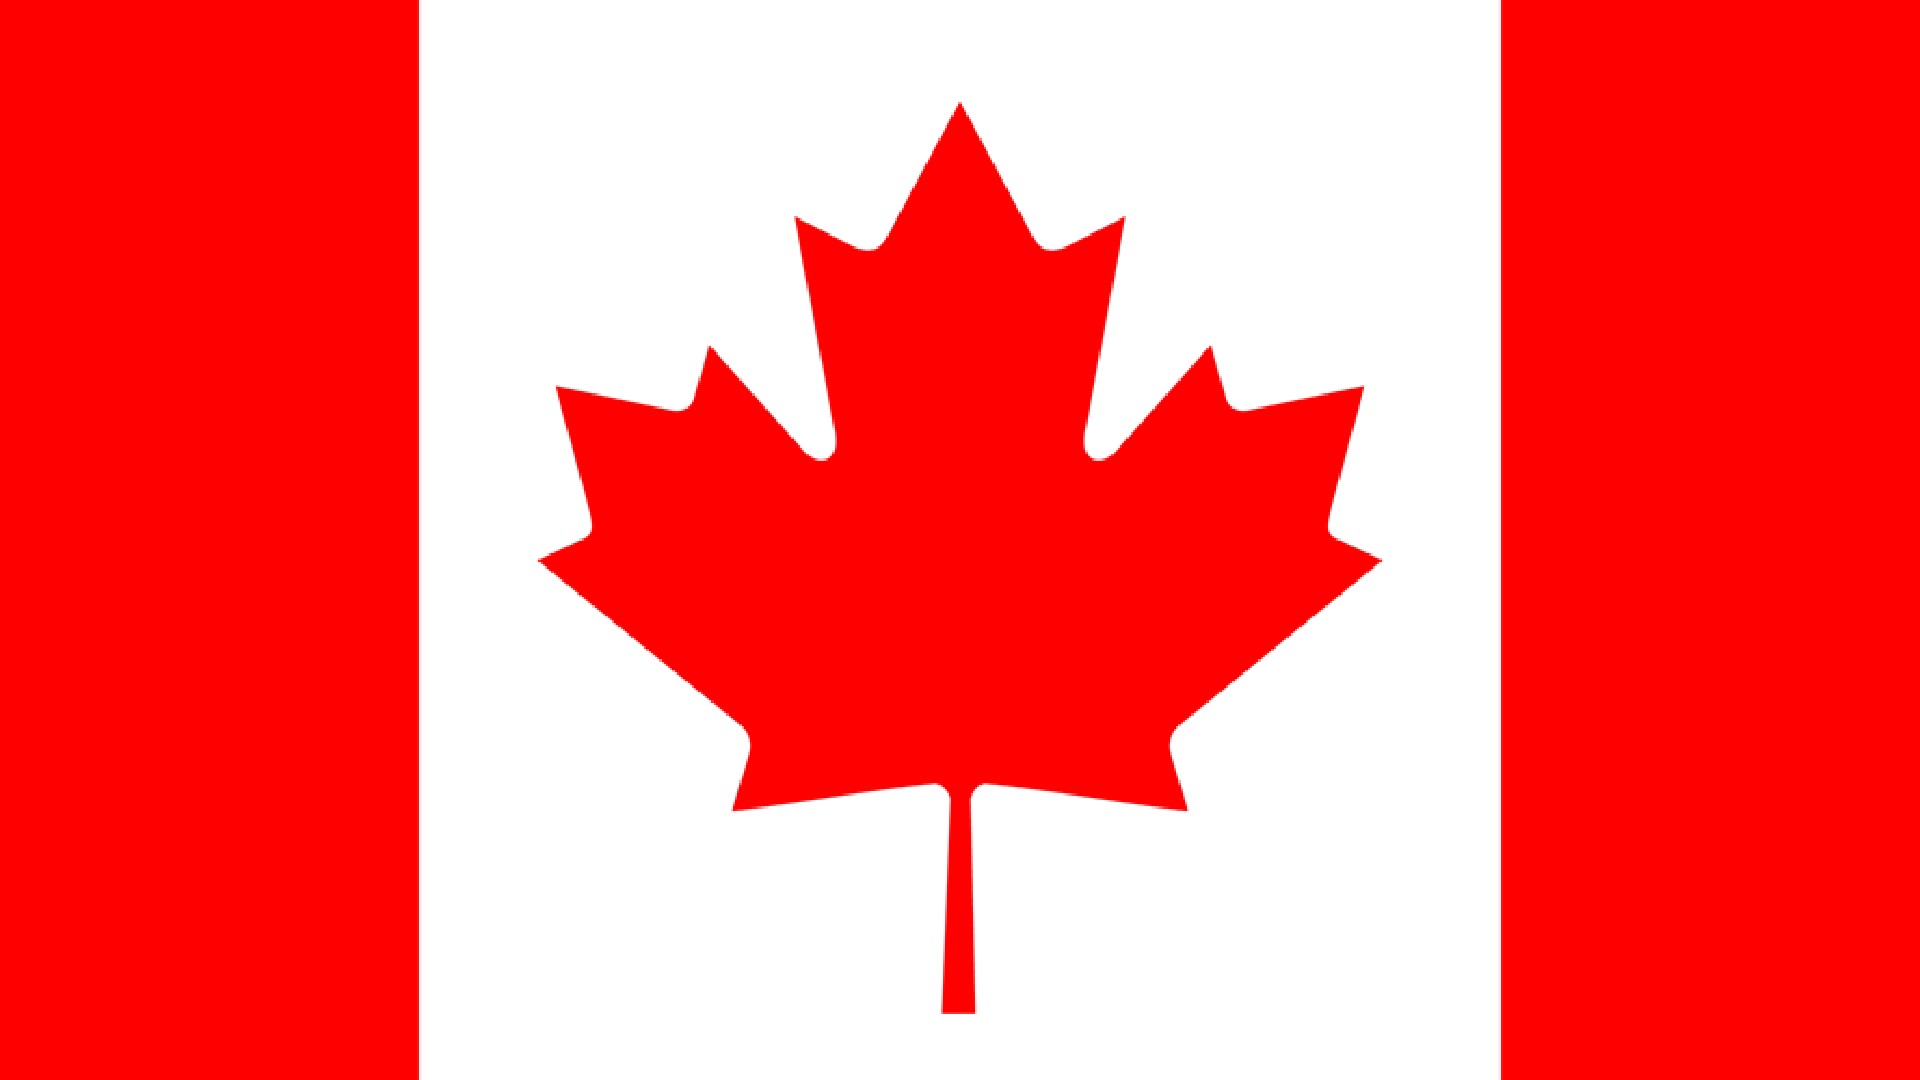 An image of the flag of Canada